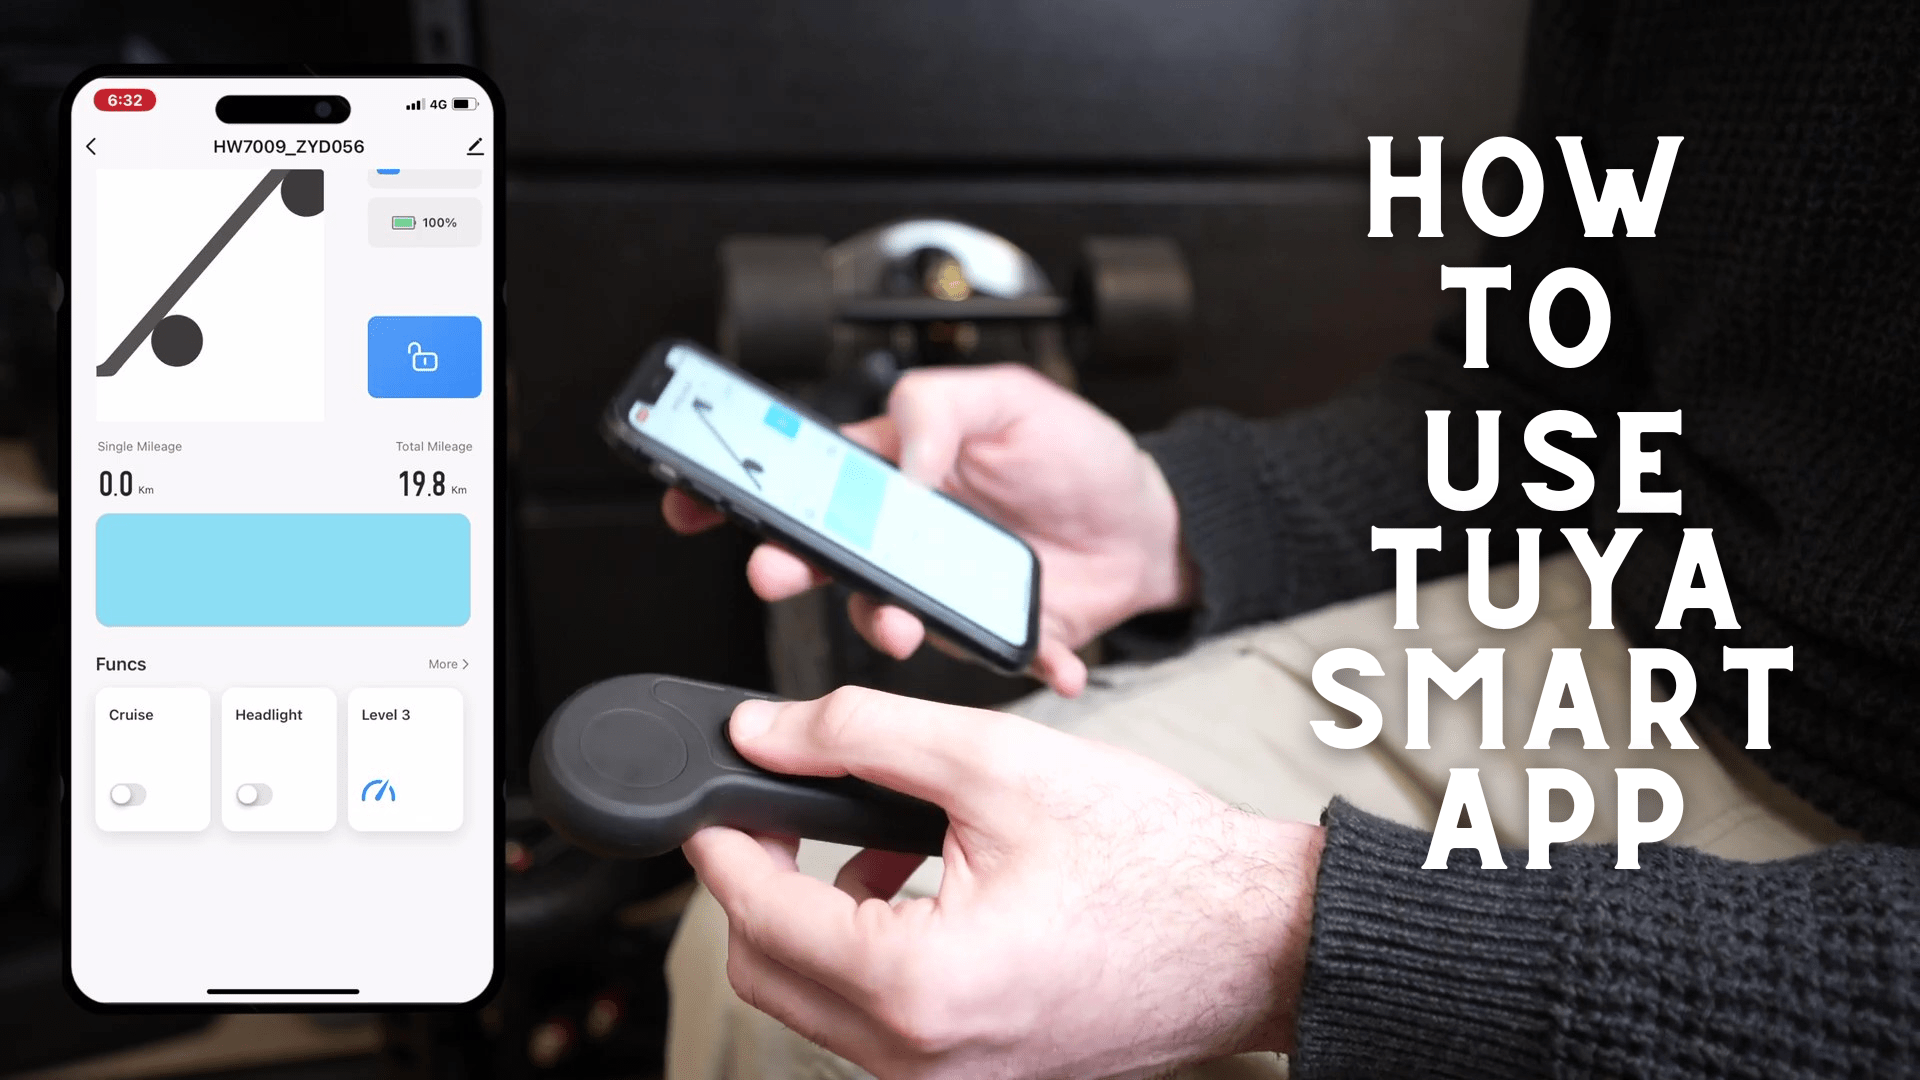 How to use the Tuya Smart App for WowGo's new boards?